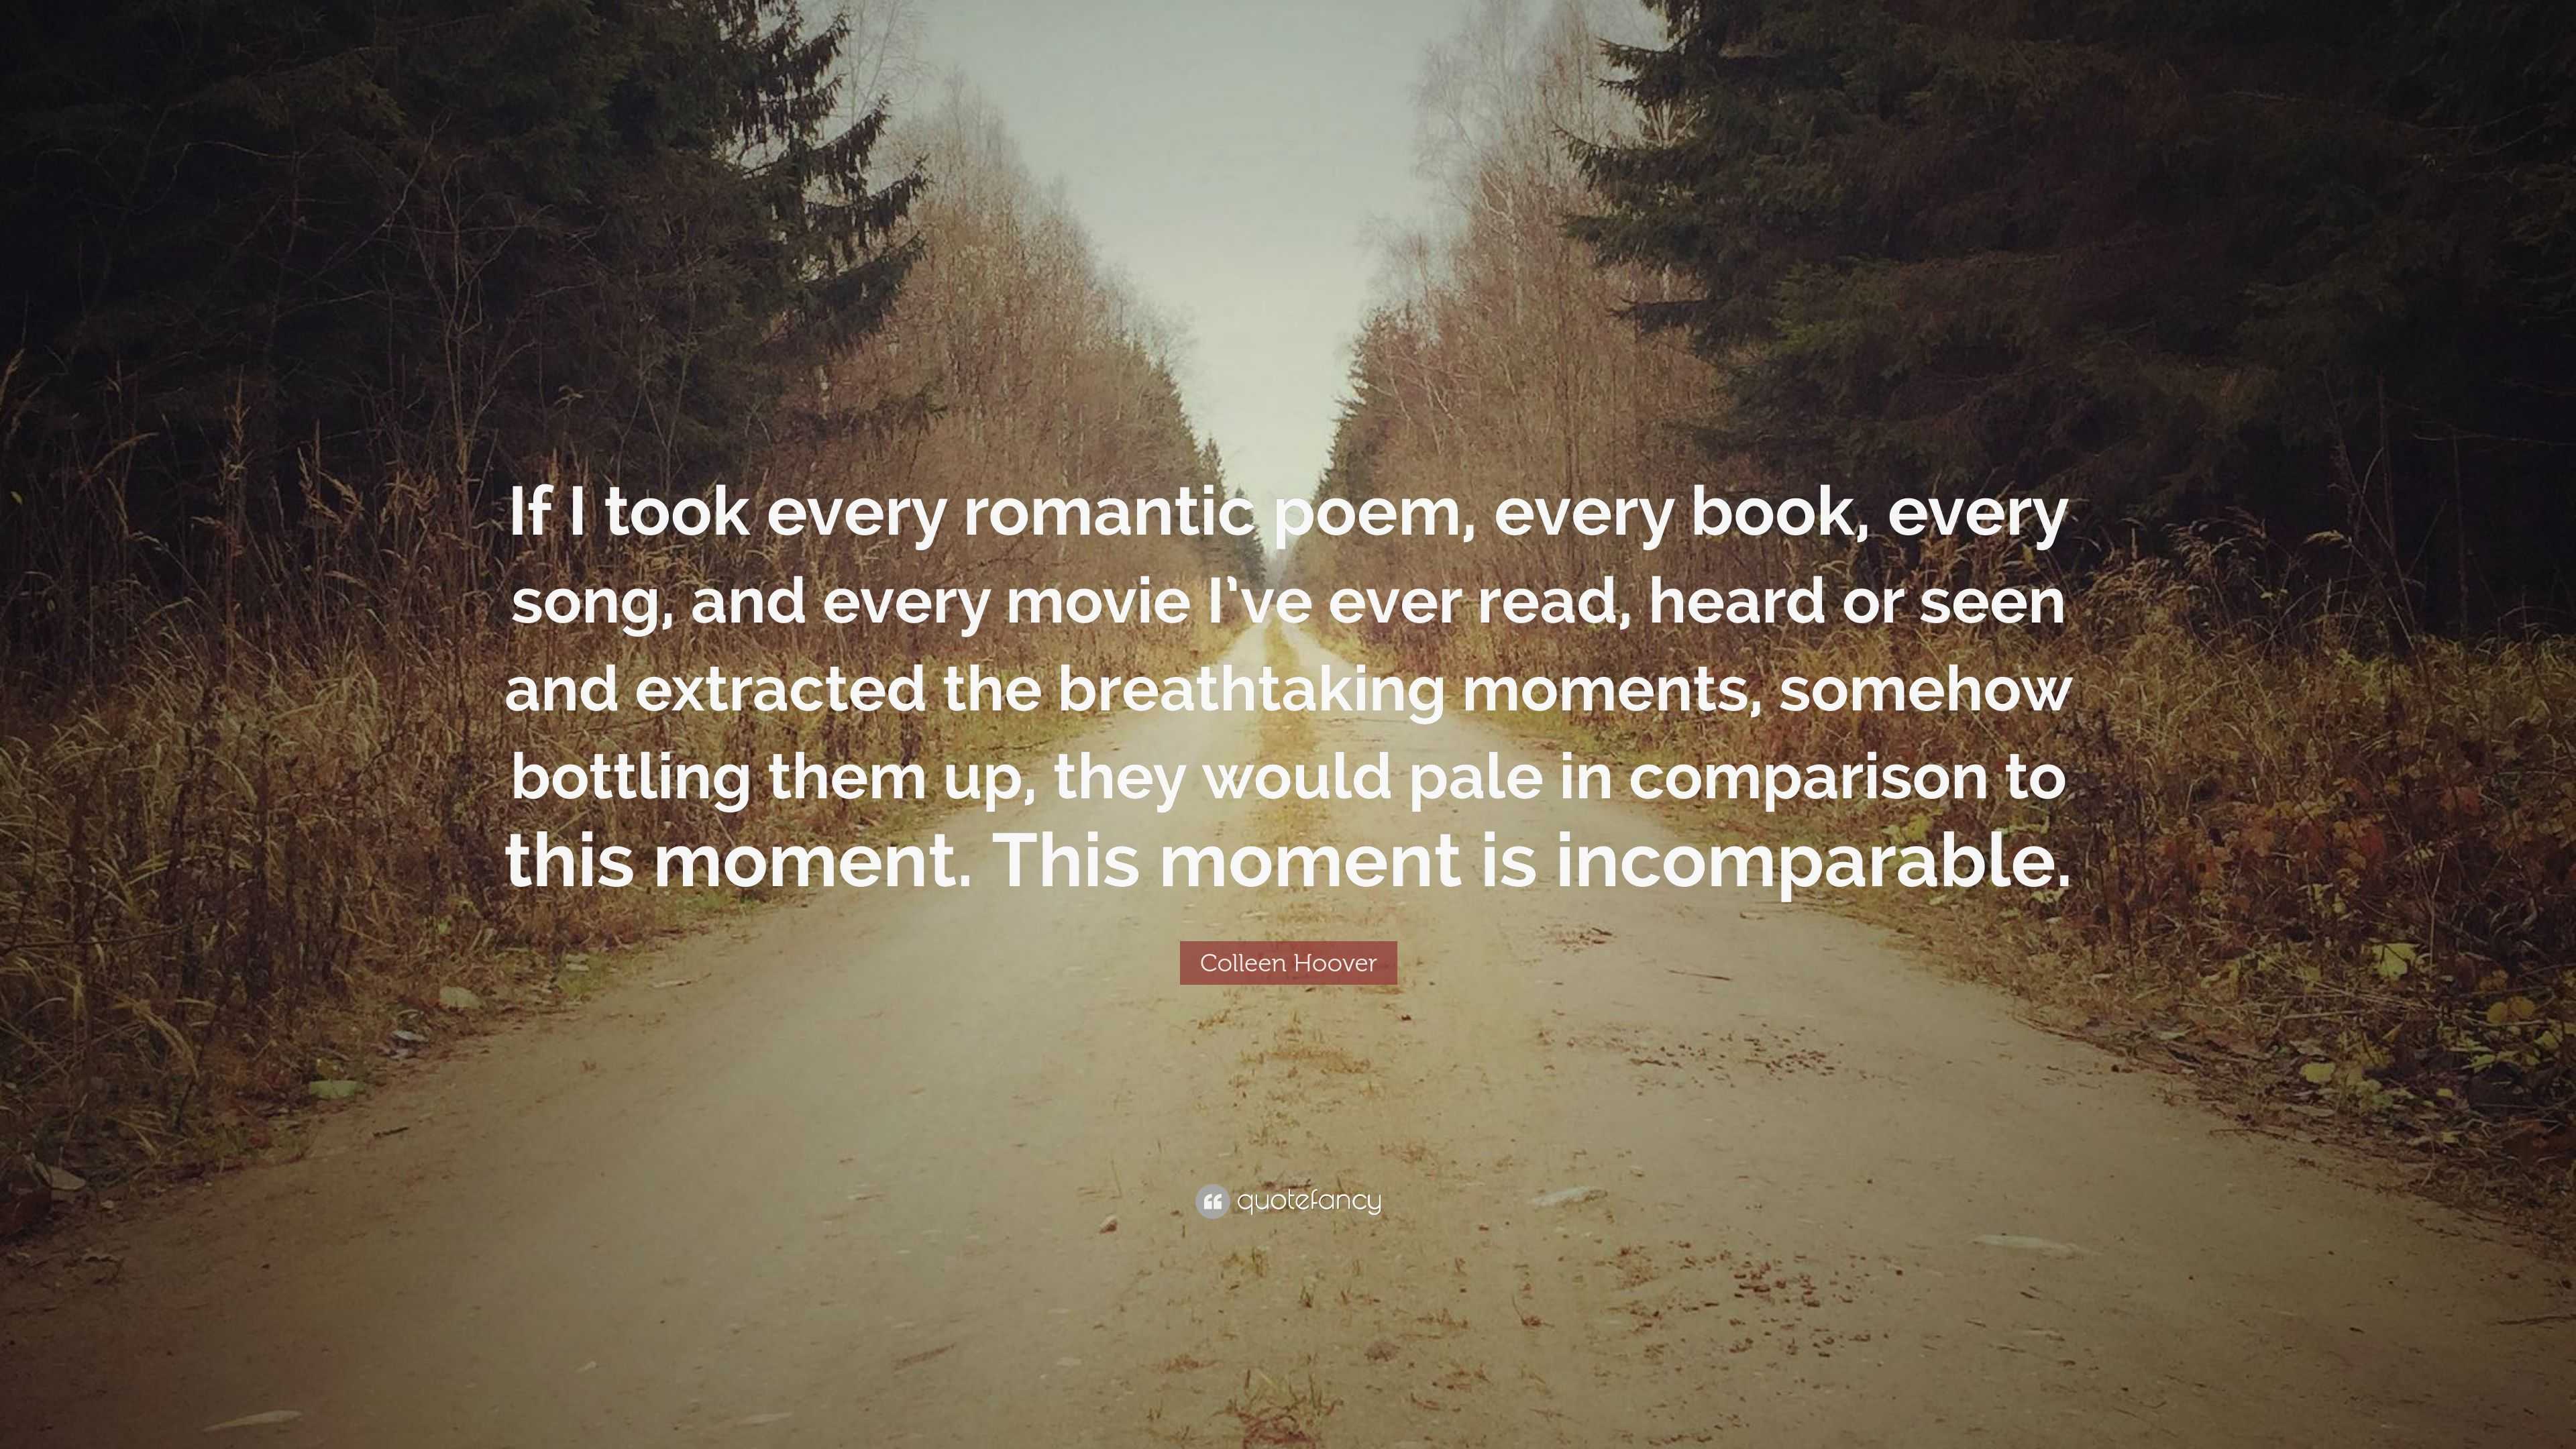 Colleen Hoover Quote: “If I took every romantic poem, every book, every